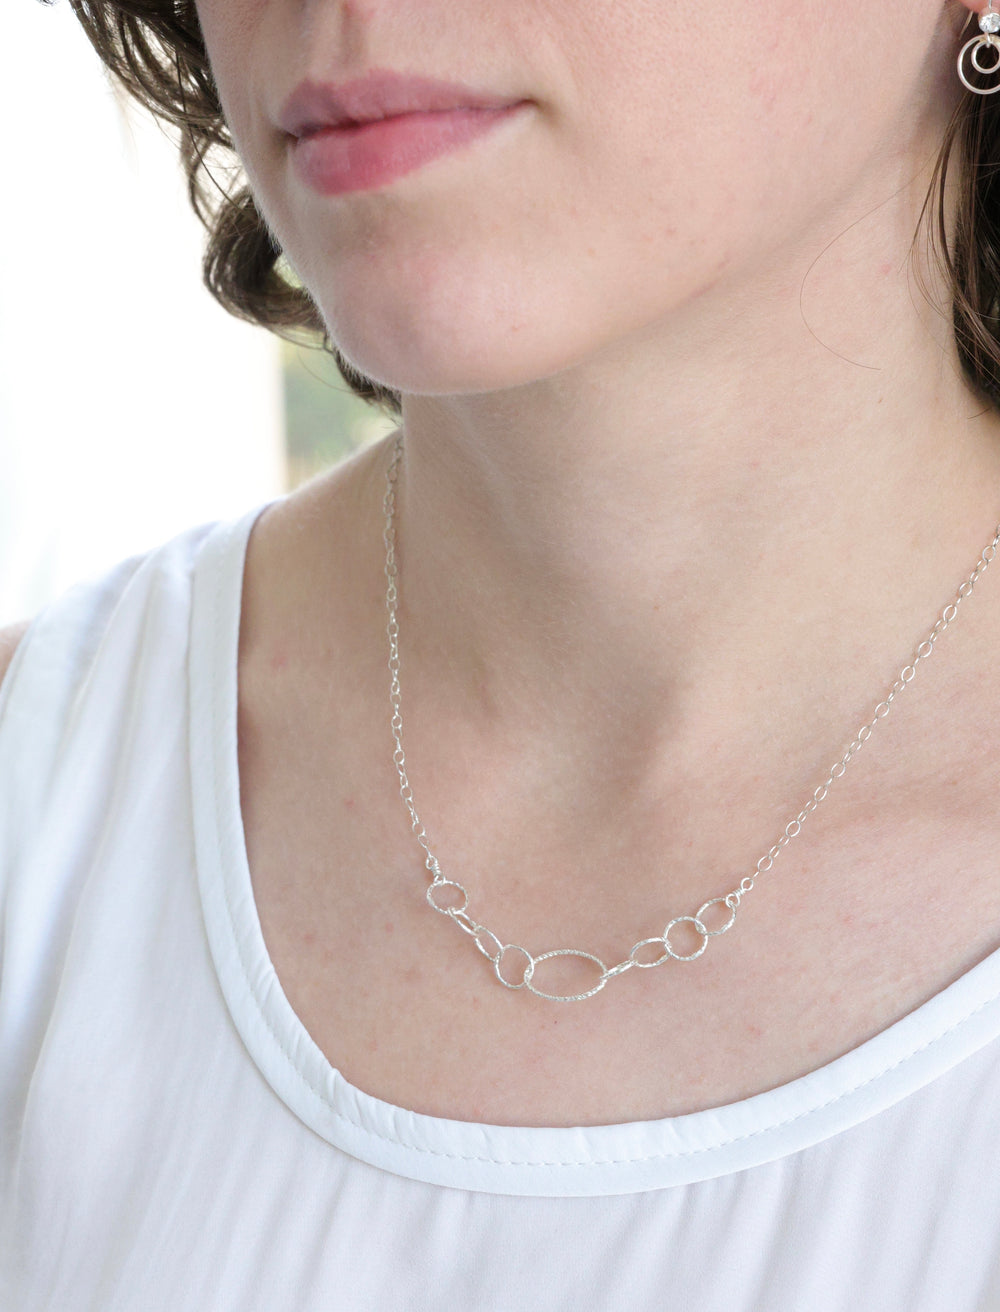 Silver necklace shown on